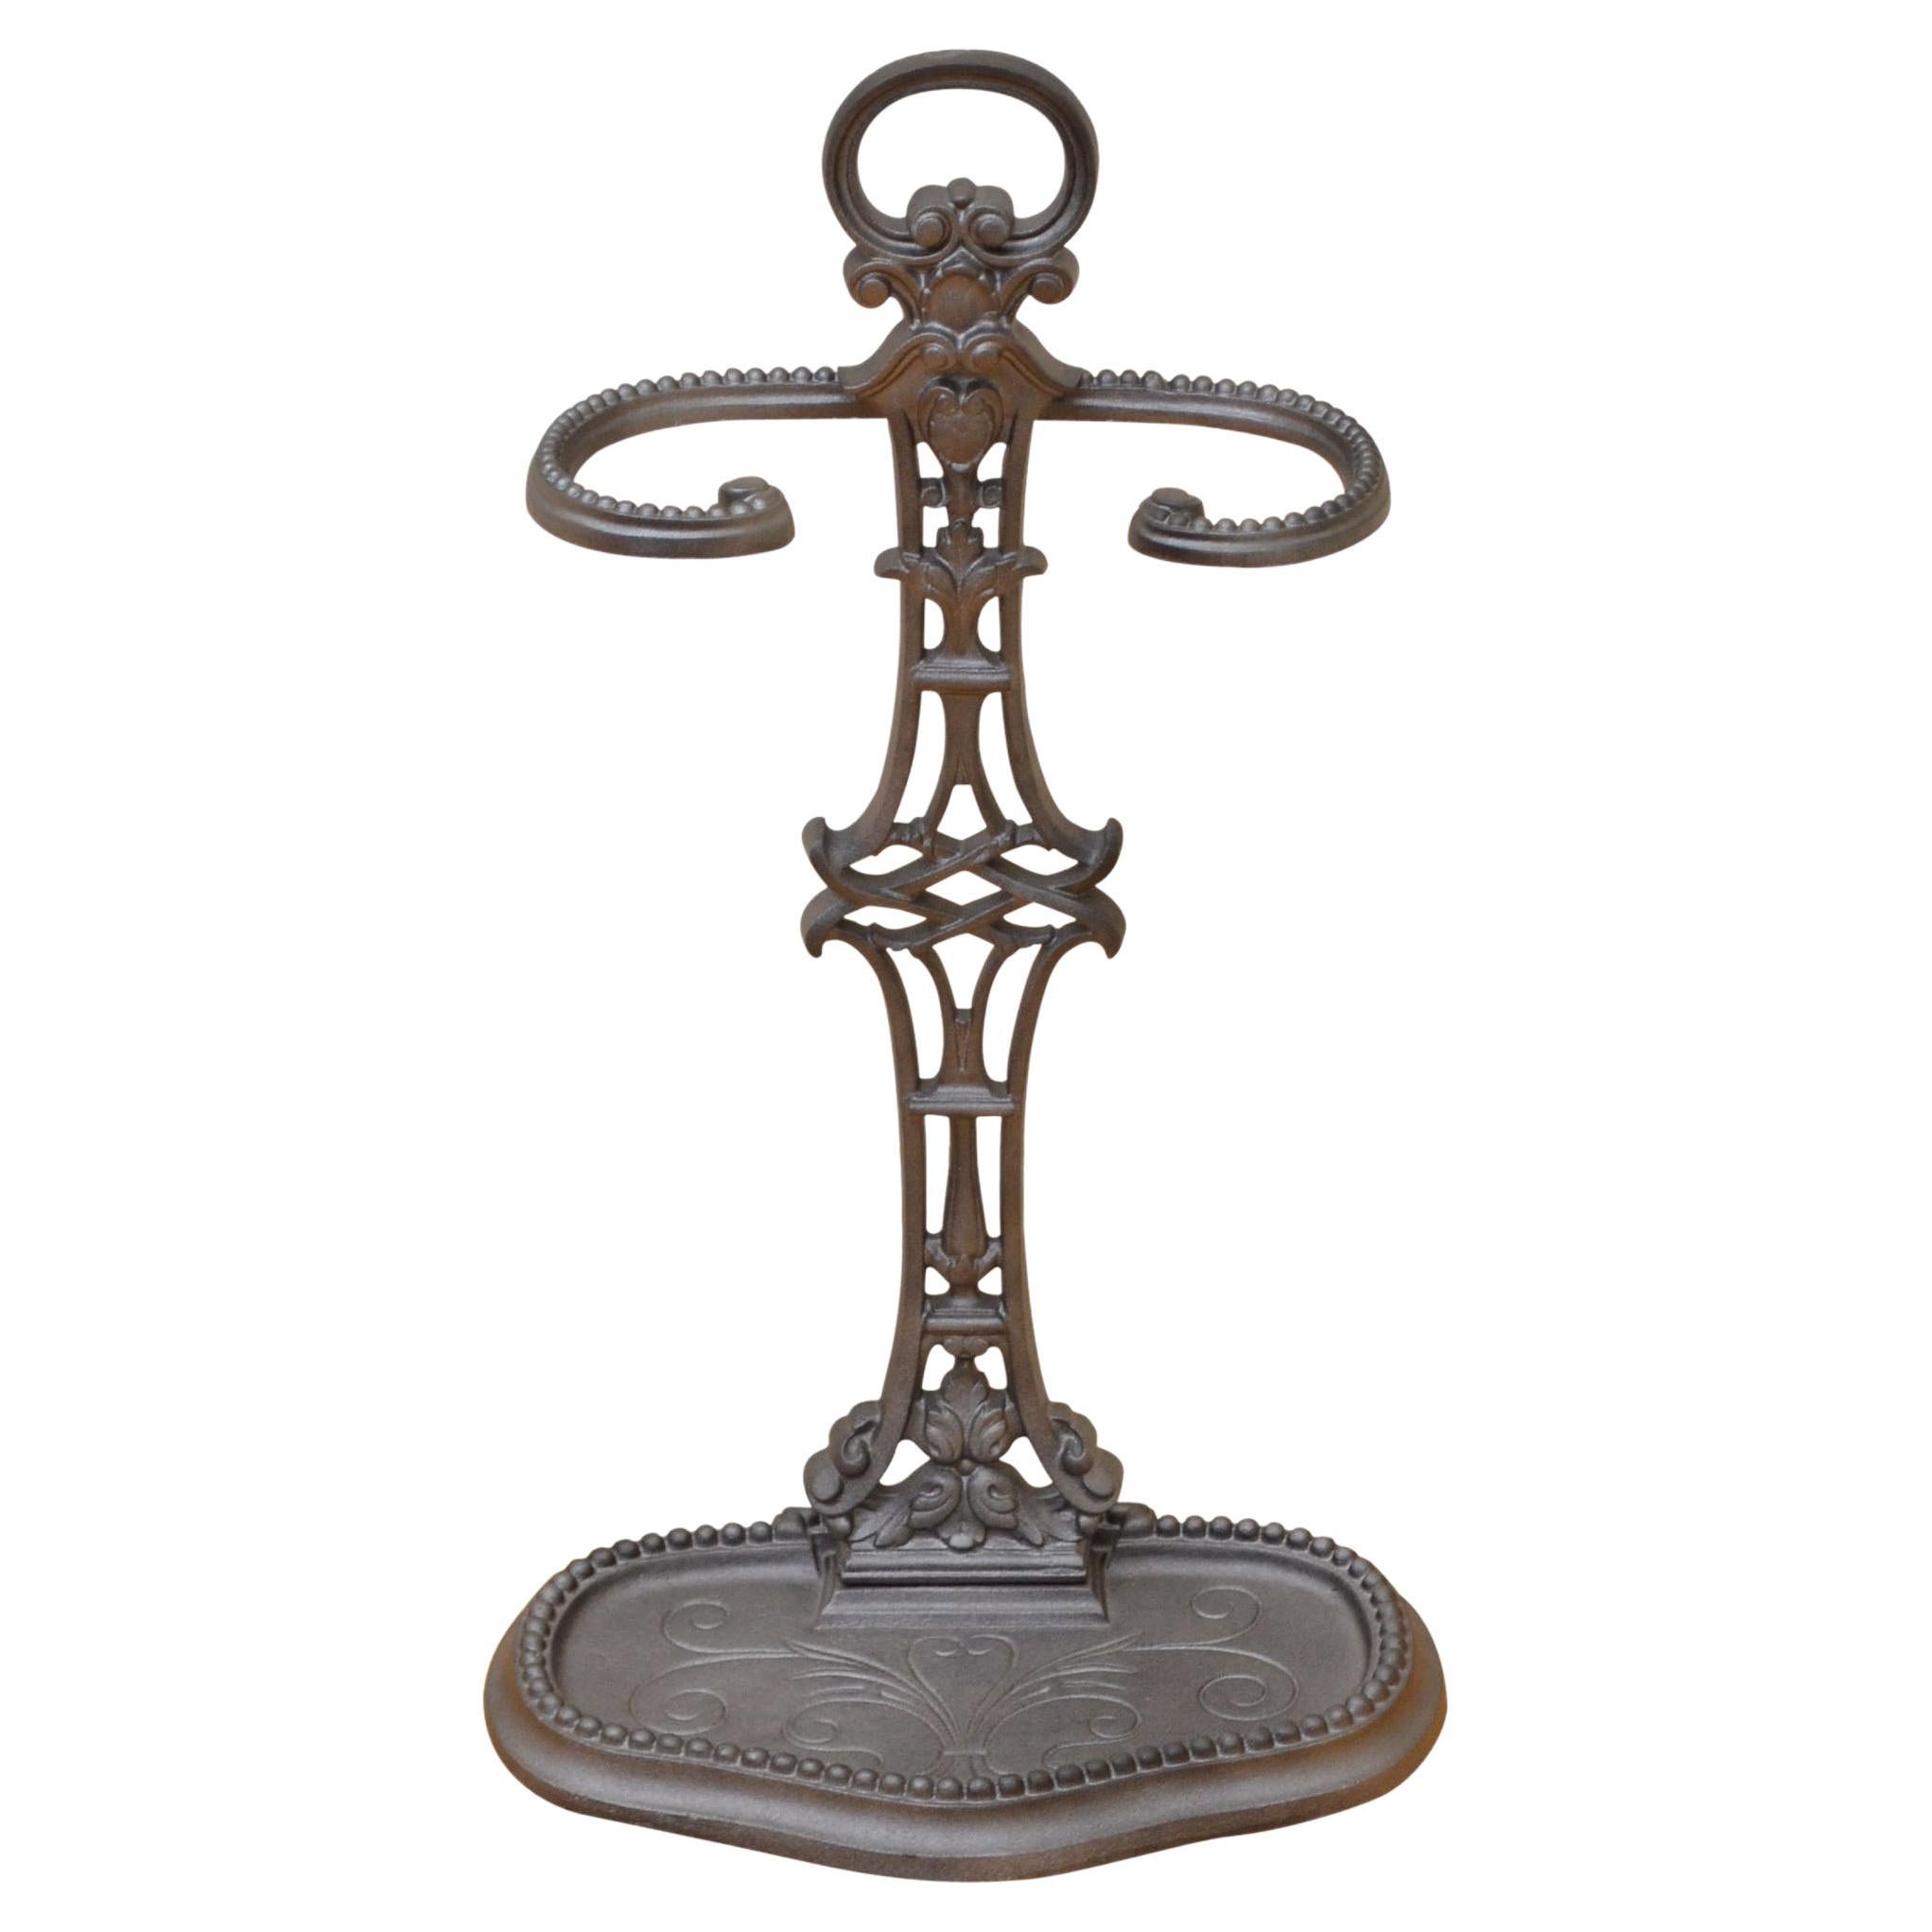 19th Century French Umbrella Stand or Fire Companion Stand